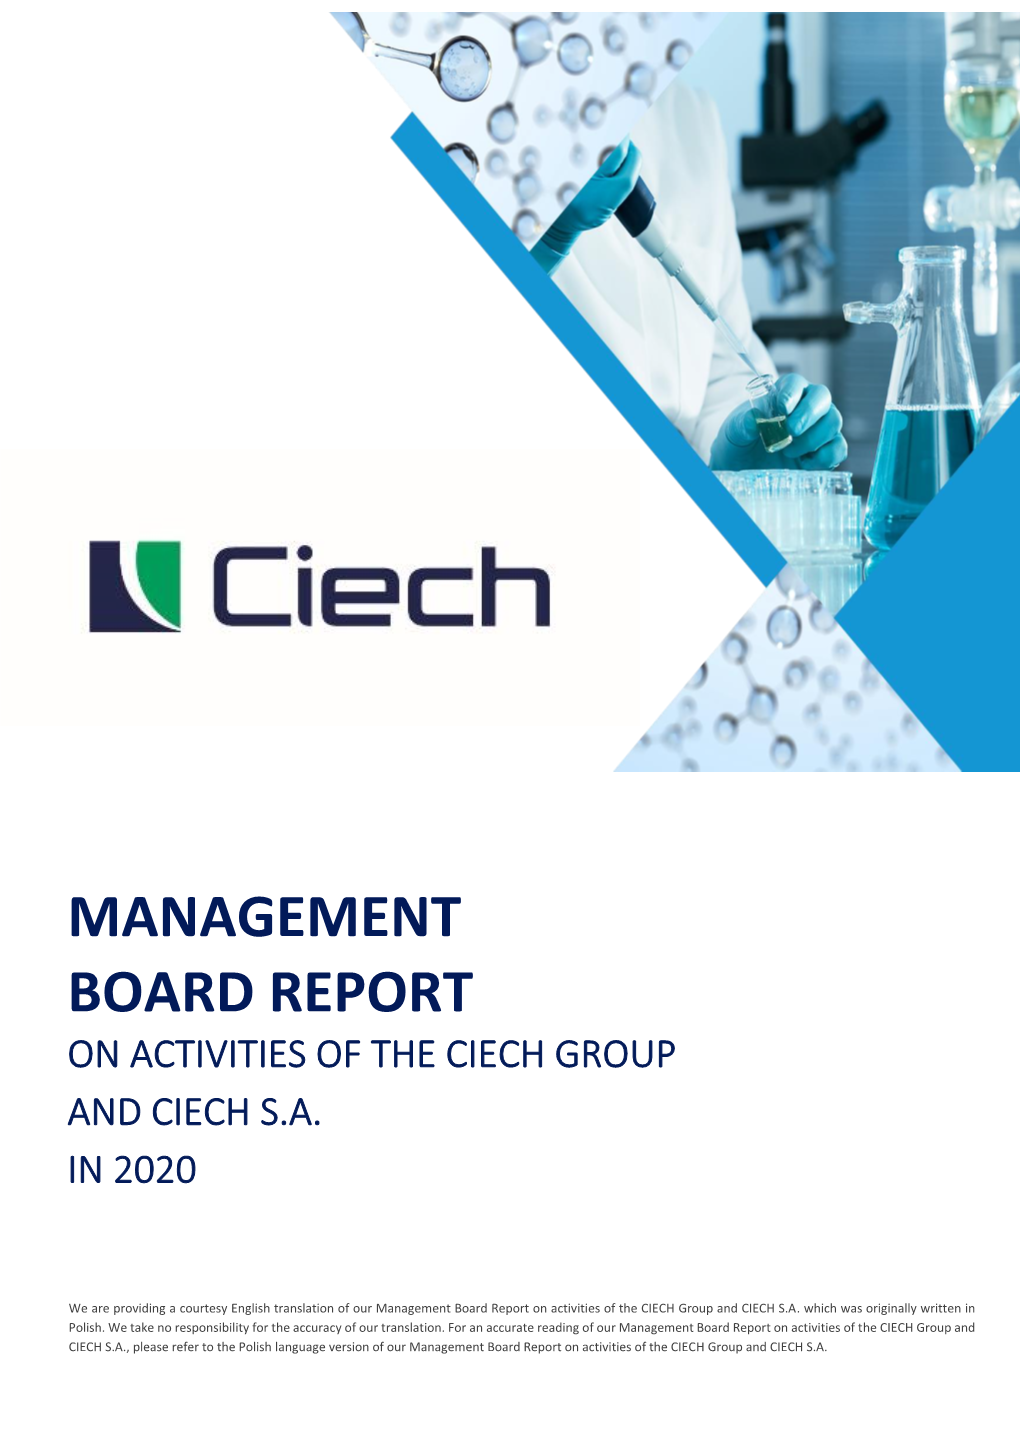 Management Board Report on Activities of the Ciech Group and Ciech S.A